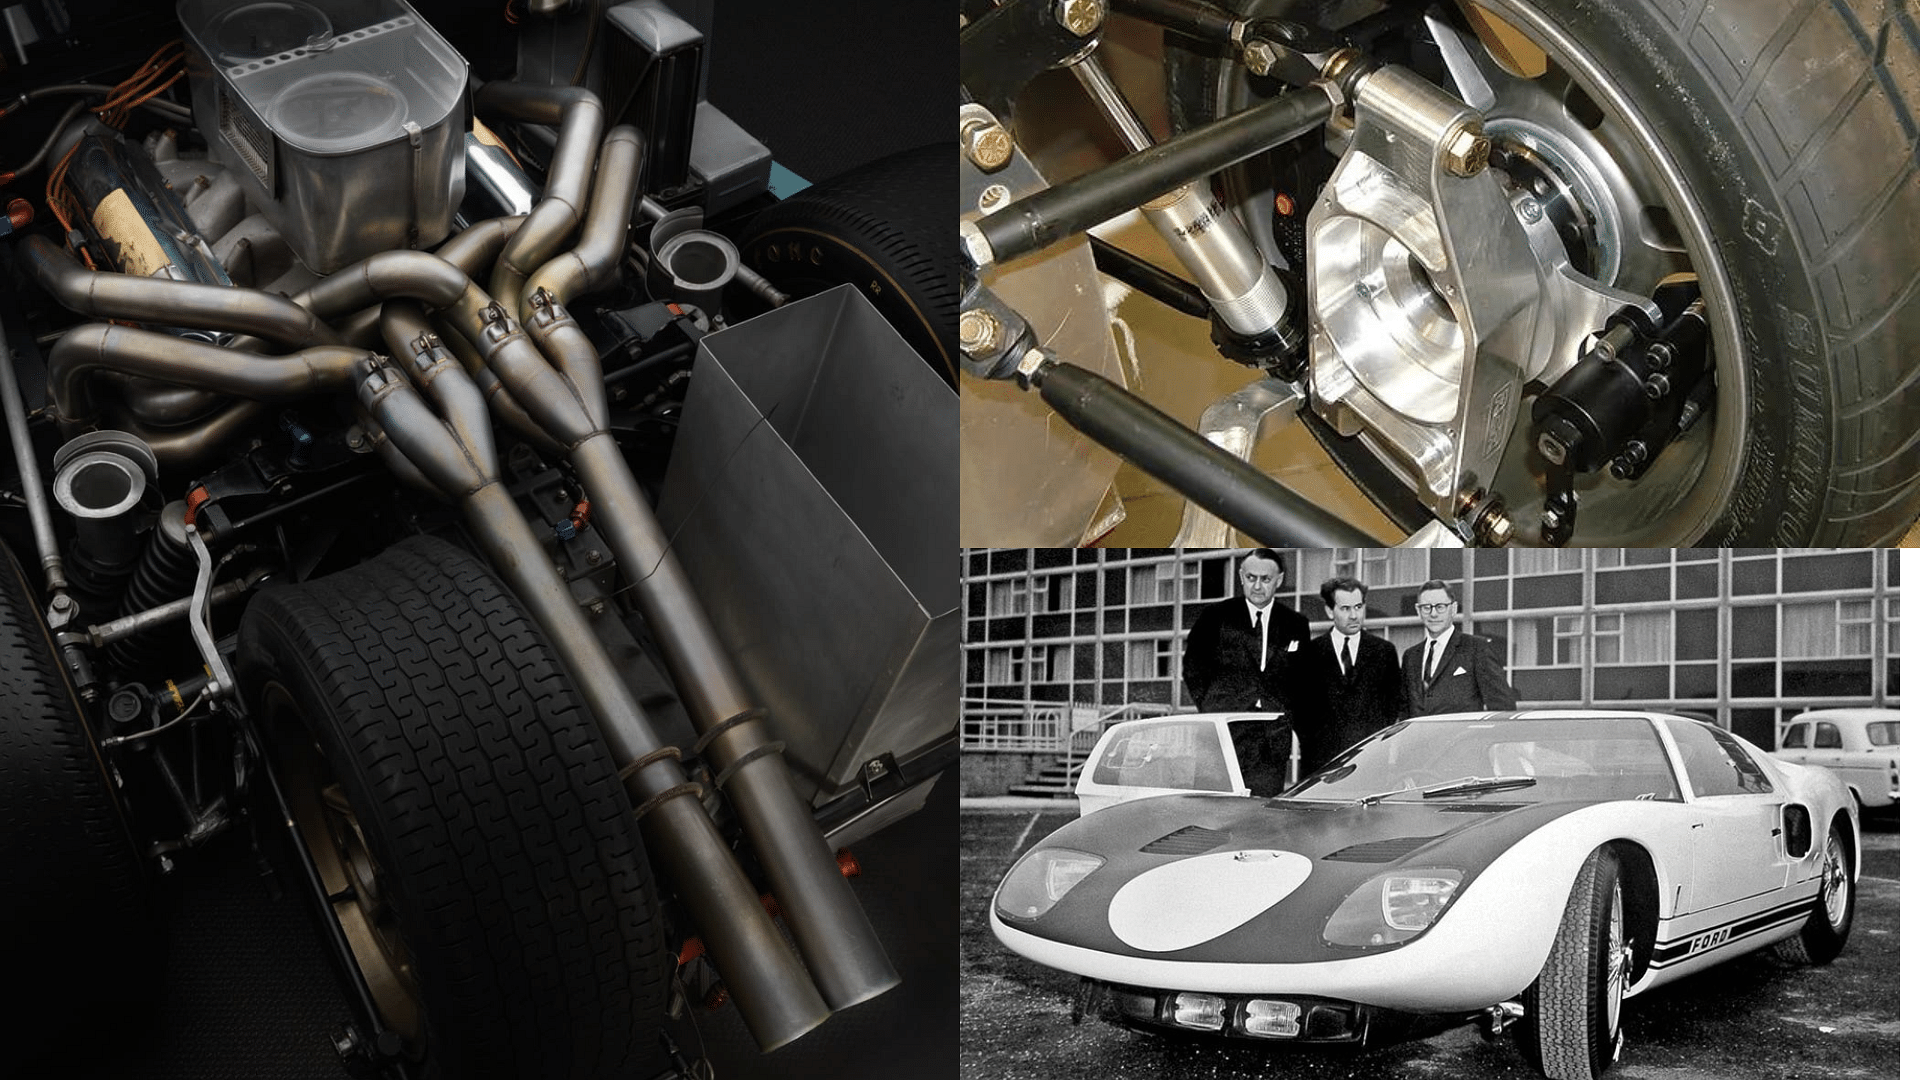 The Ford GT40 engine, suspension, wheels